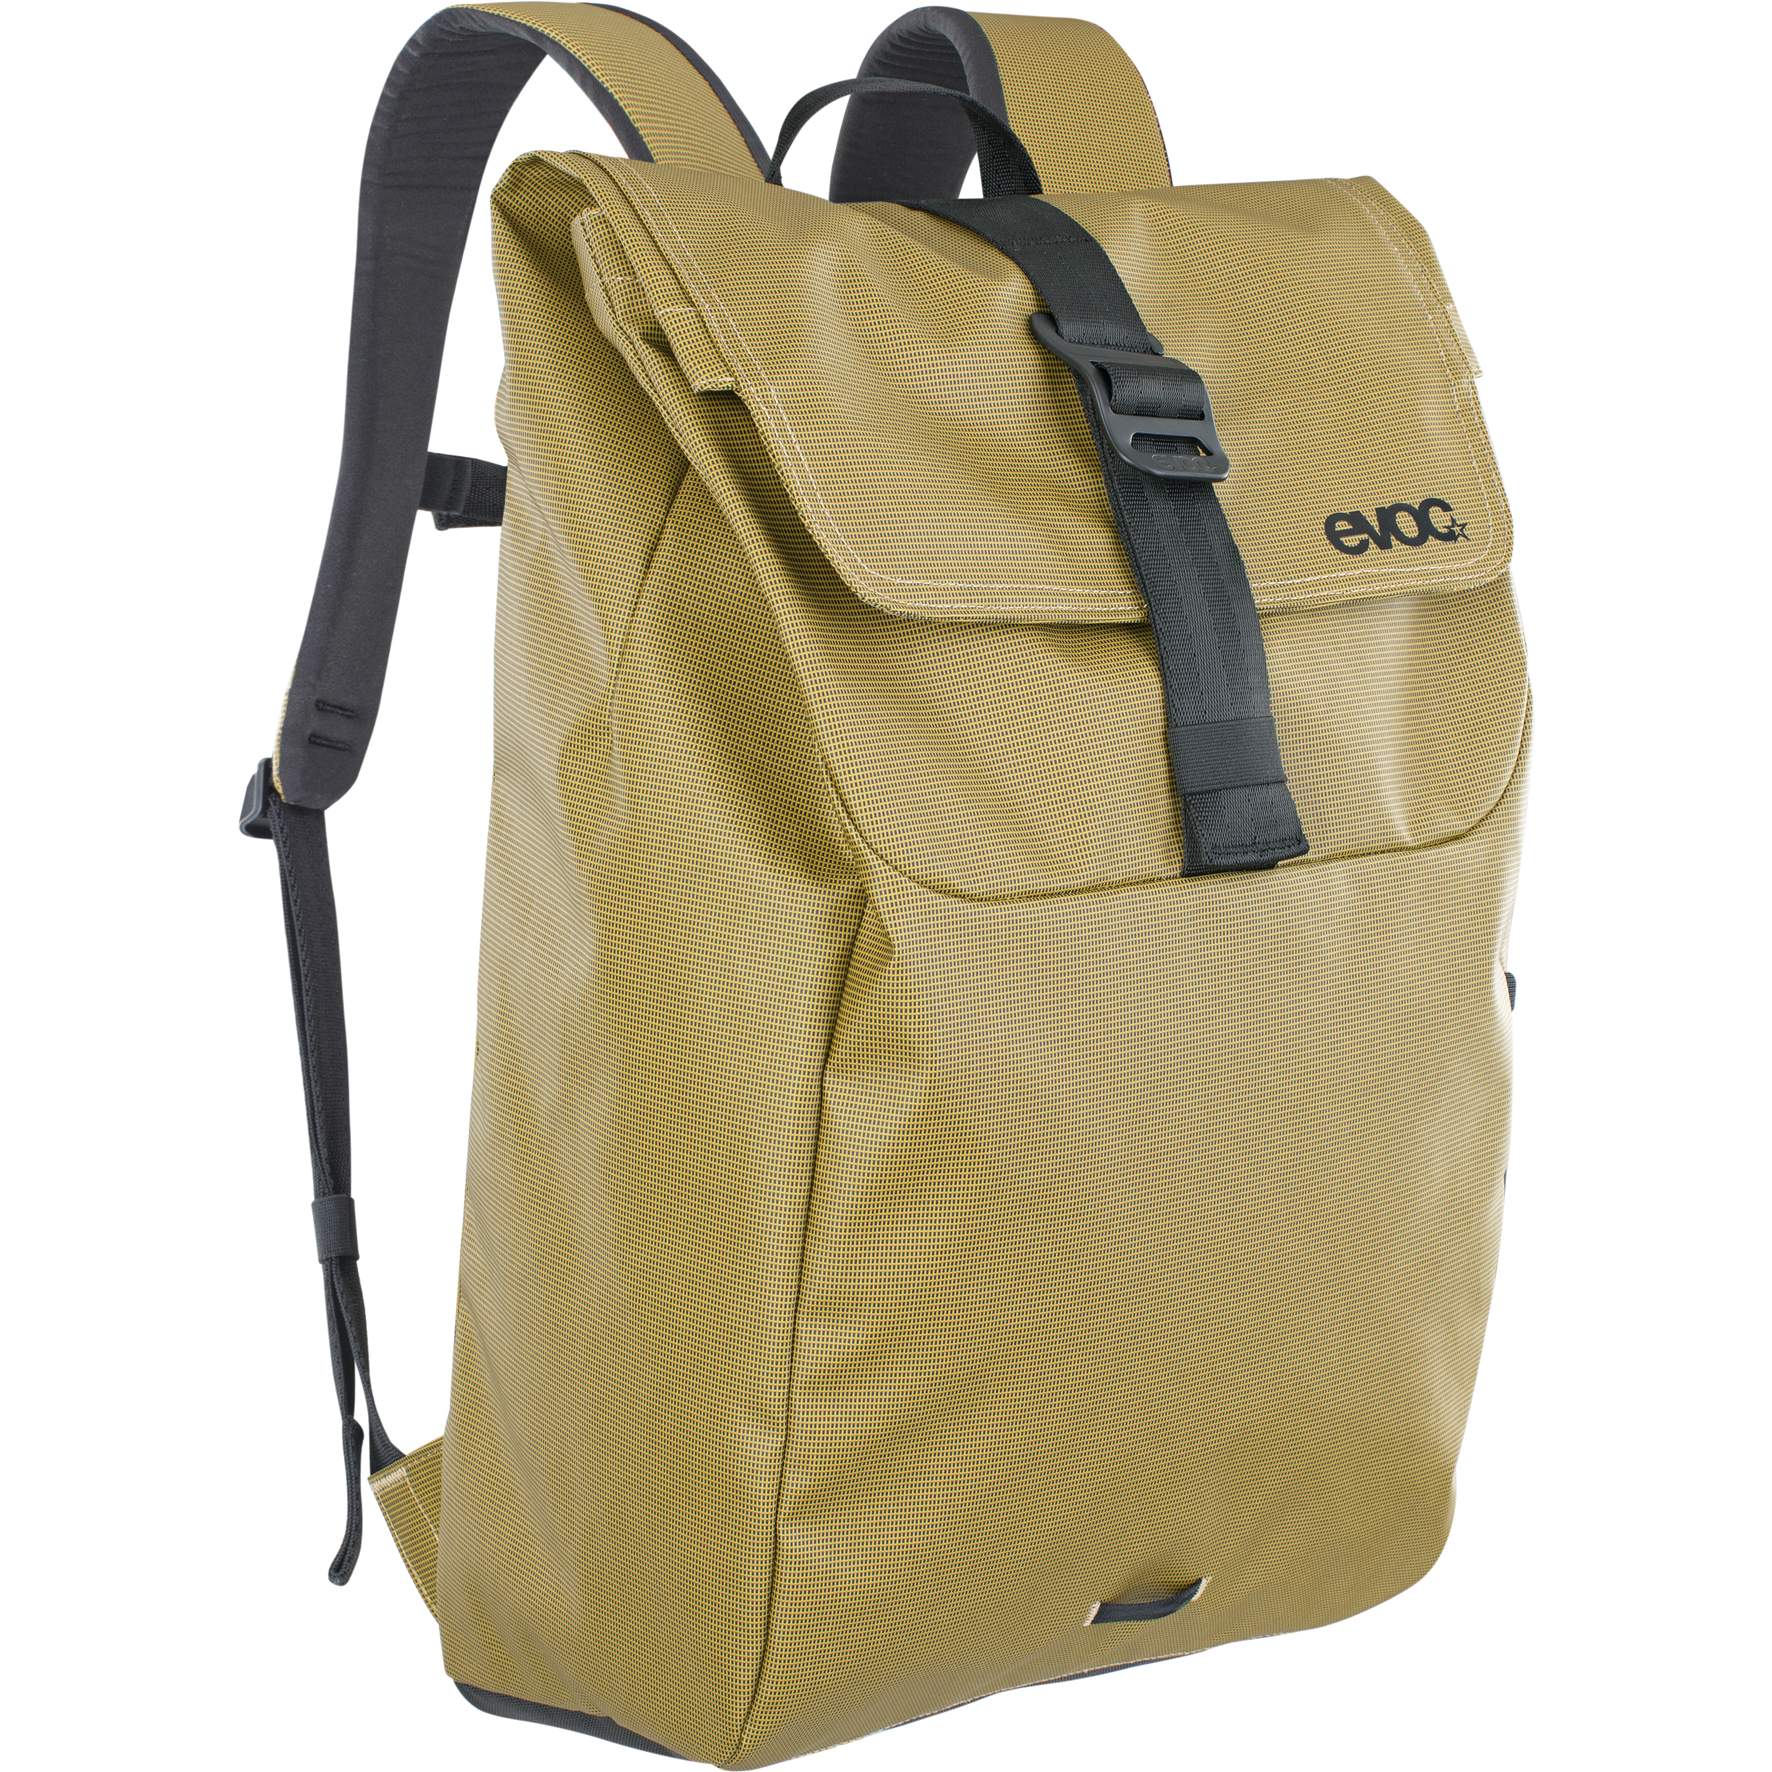 Picture of EVOC Duffle Backpack 26L - Curry/Black